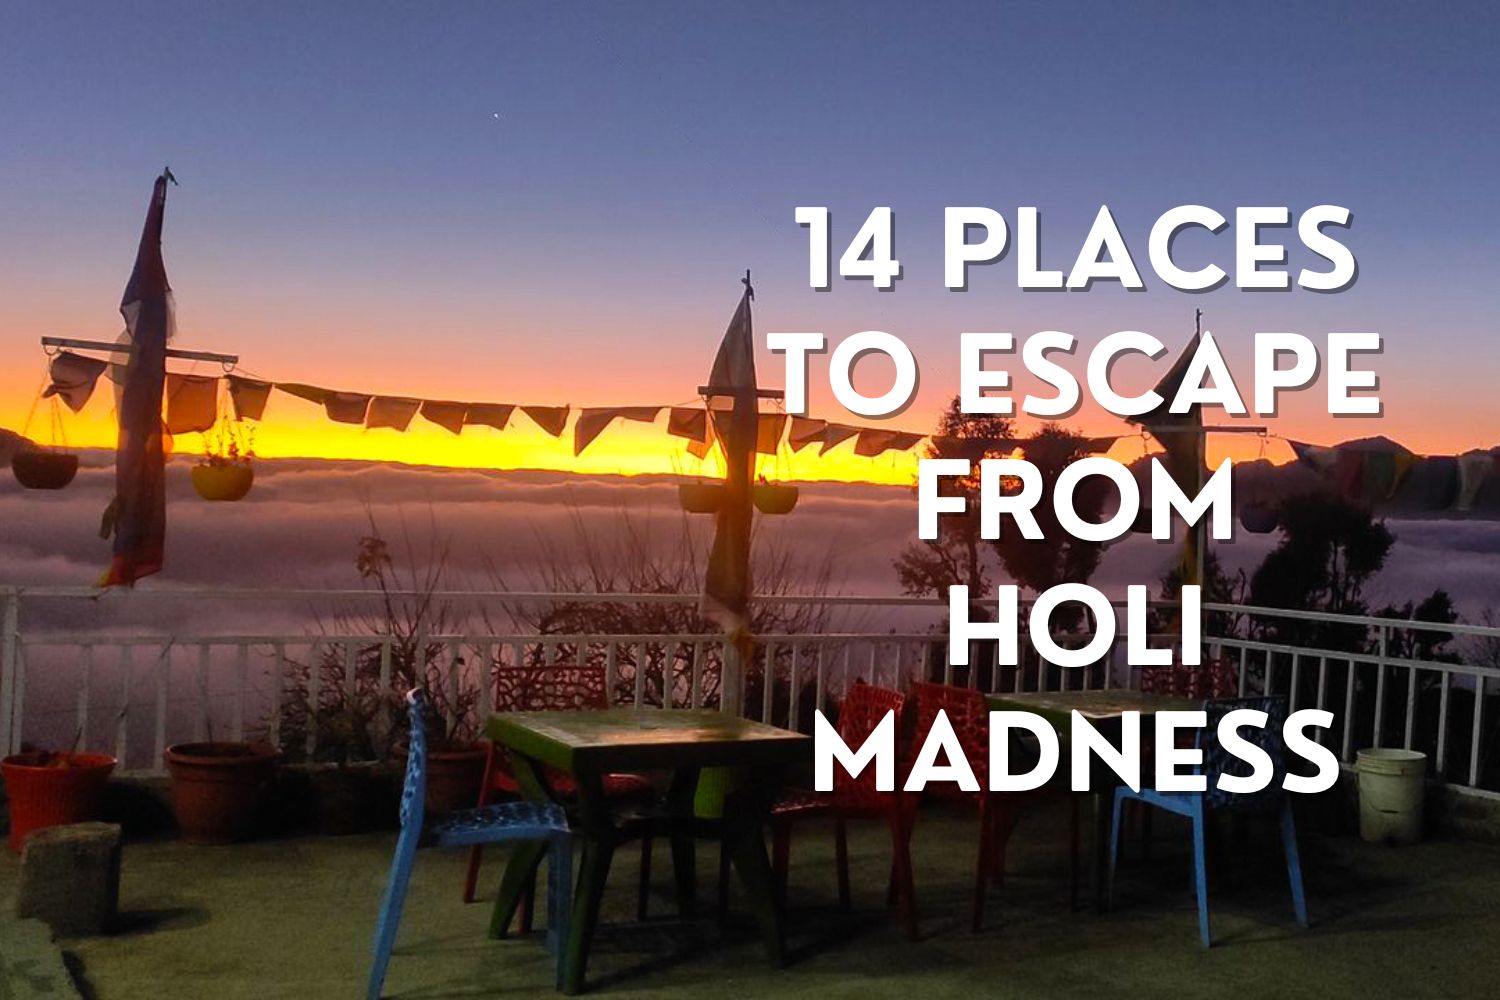 14 Places to escape from holi madness